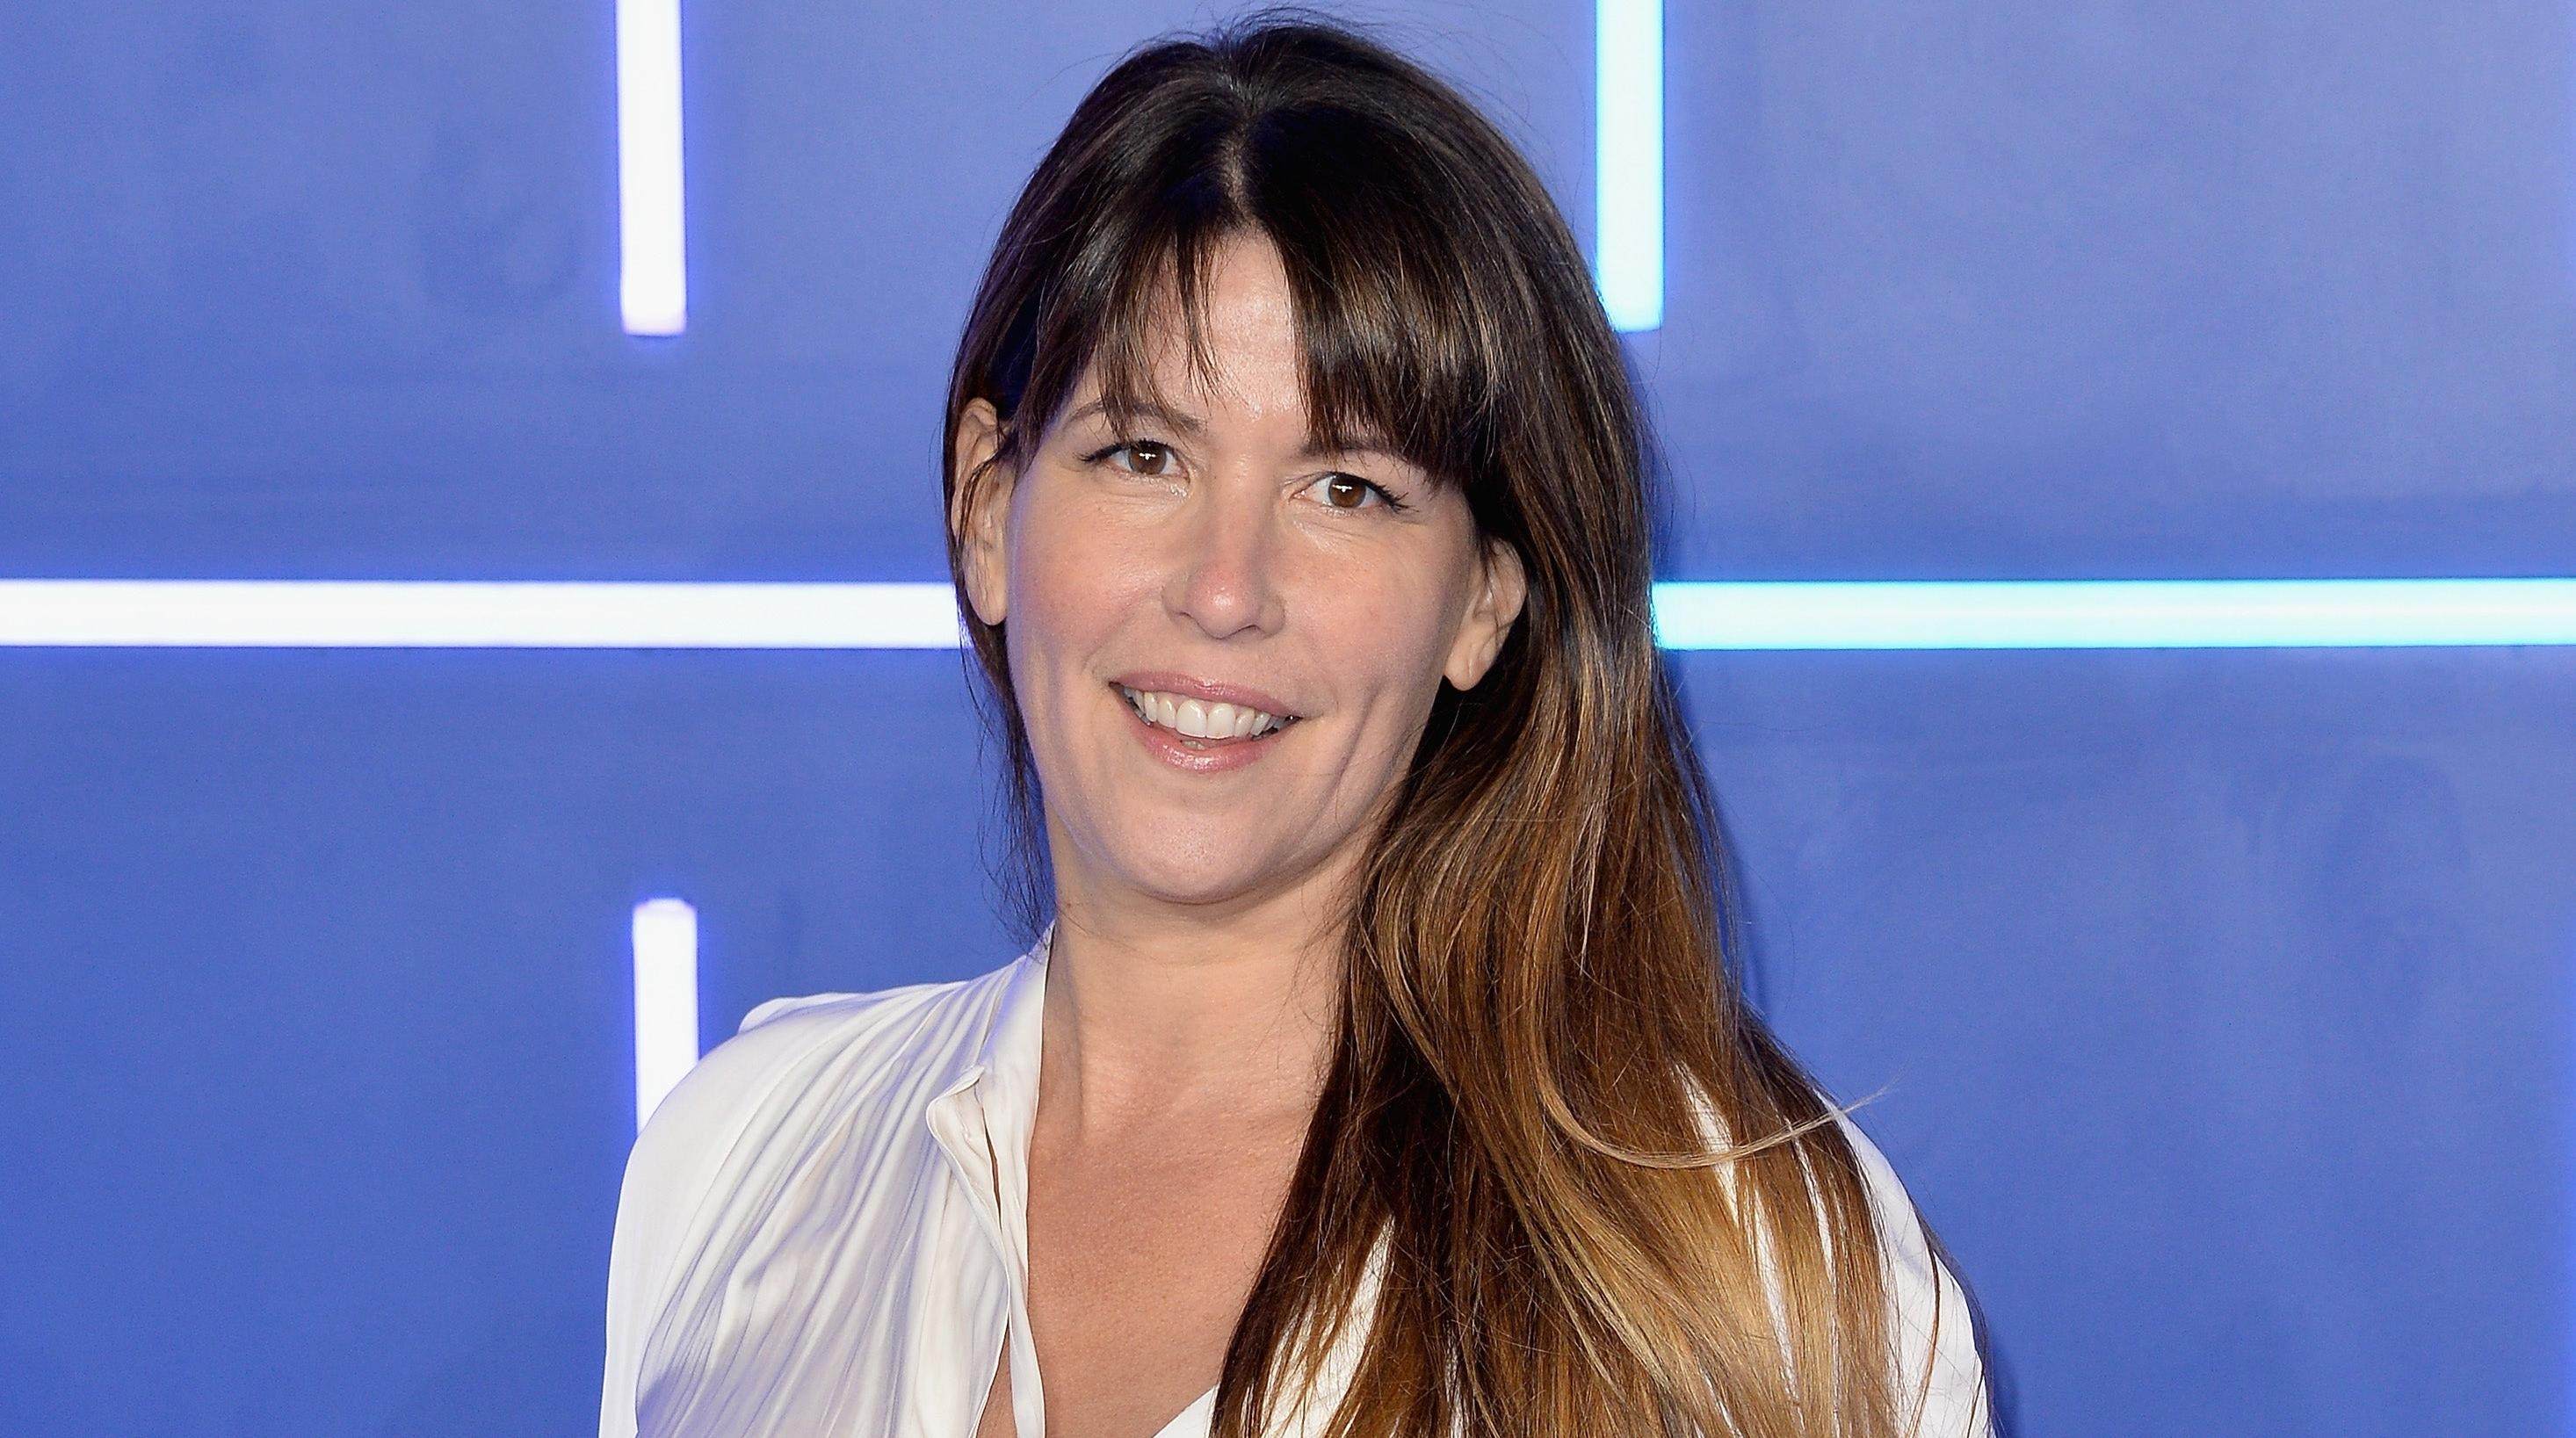 Patty Jenkins says the movies released on streaming services “look like fake movies”